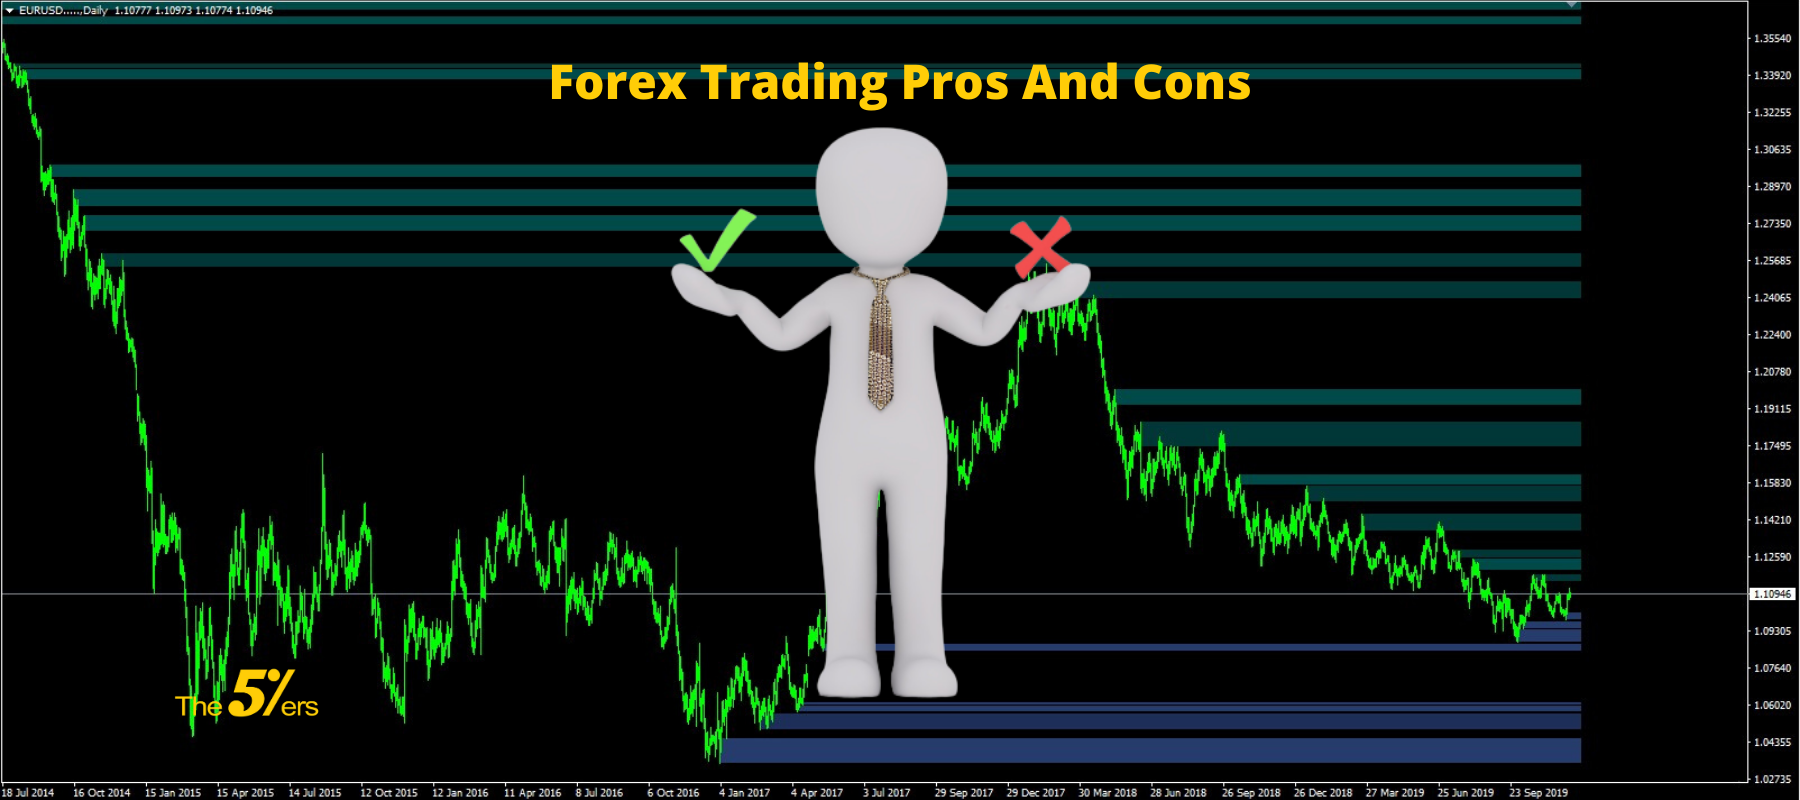 Forex Trading Pros And Cons